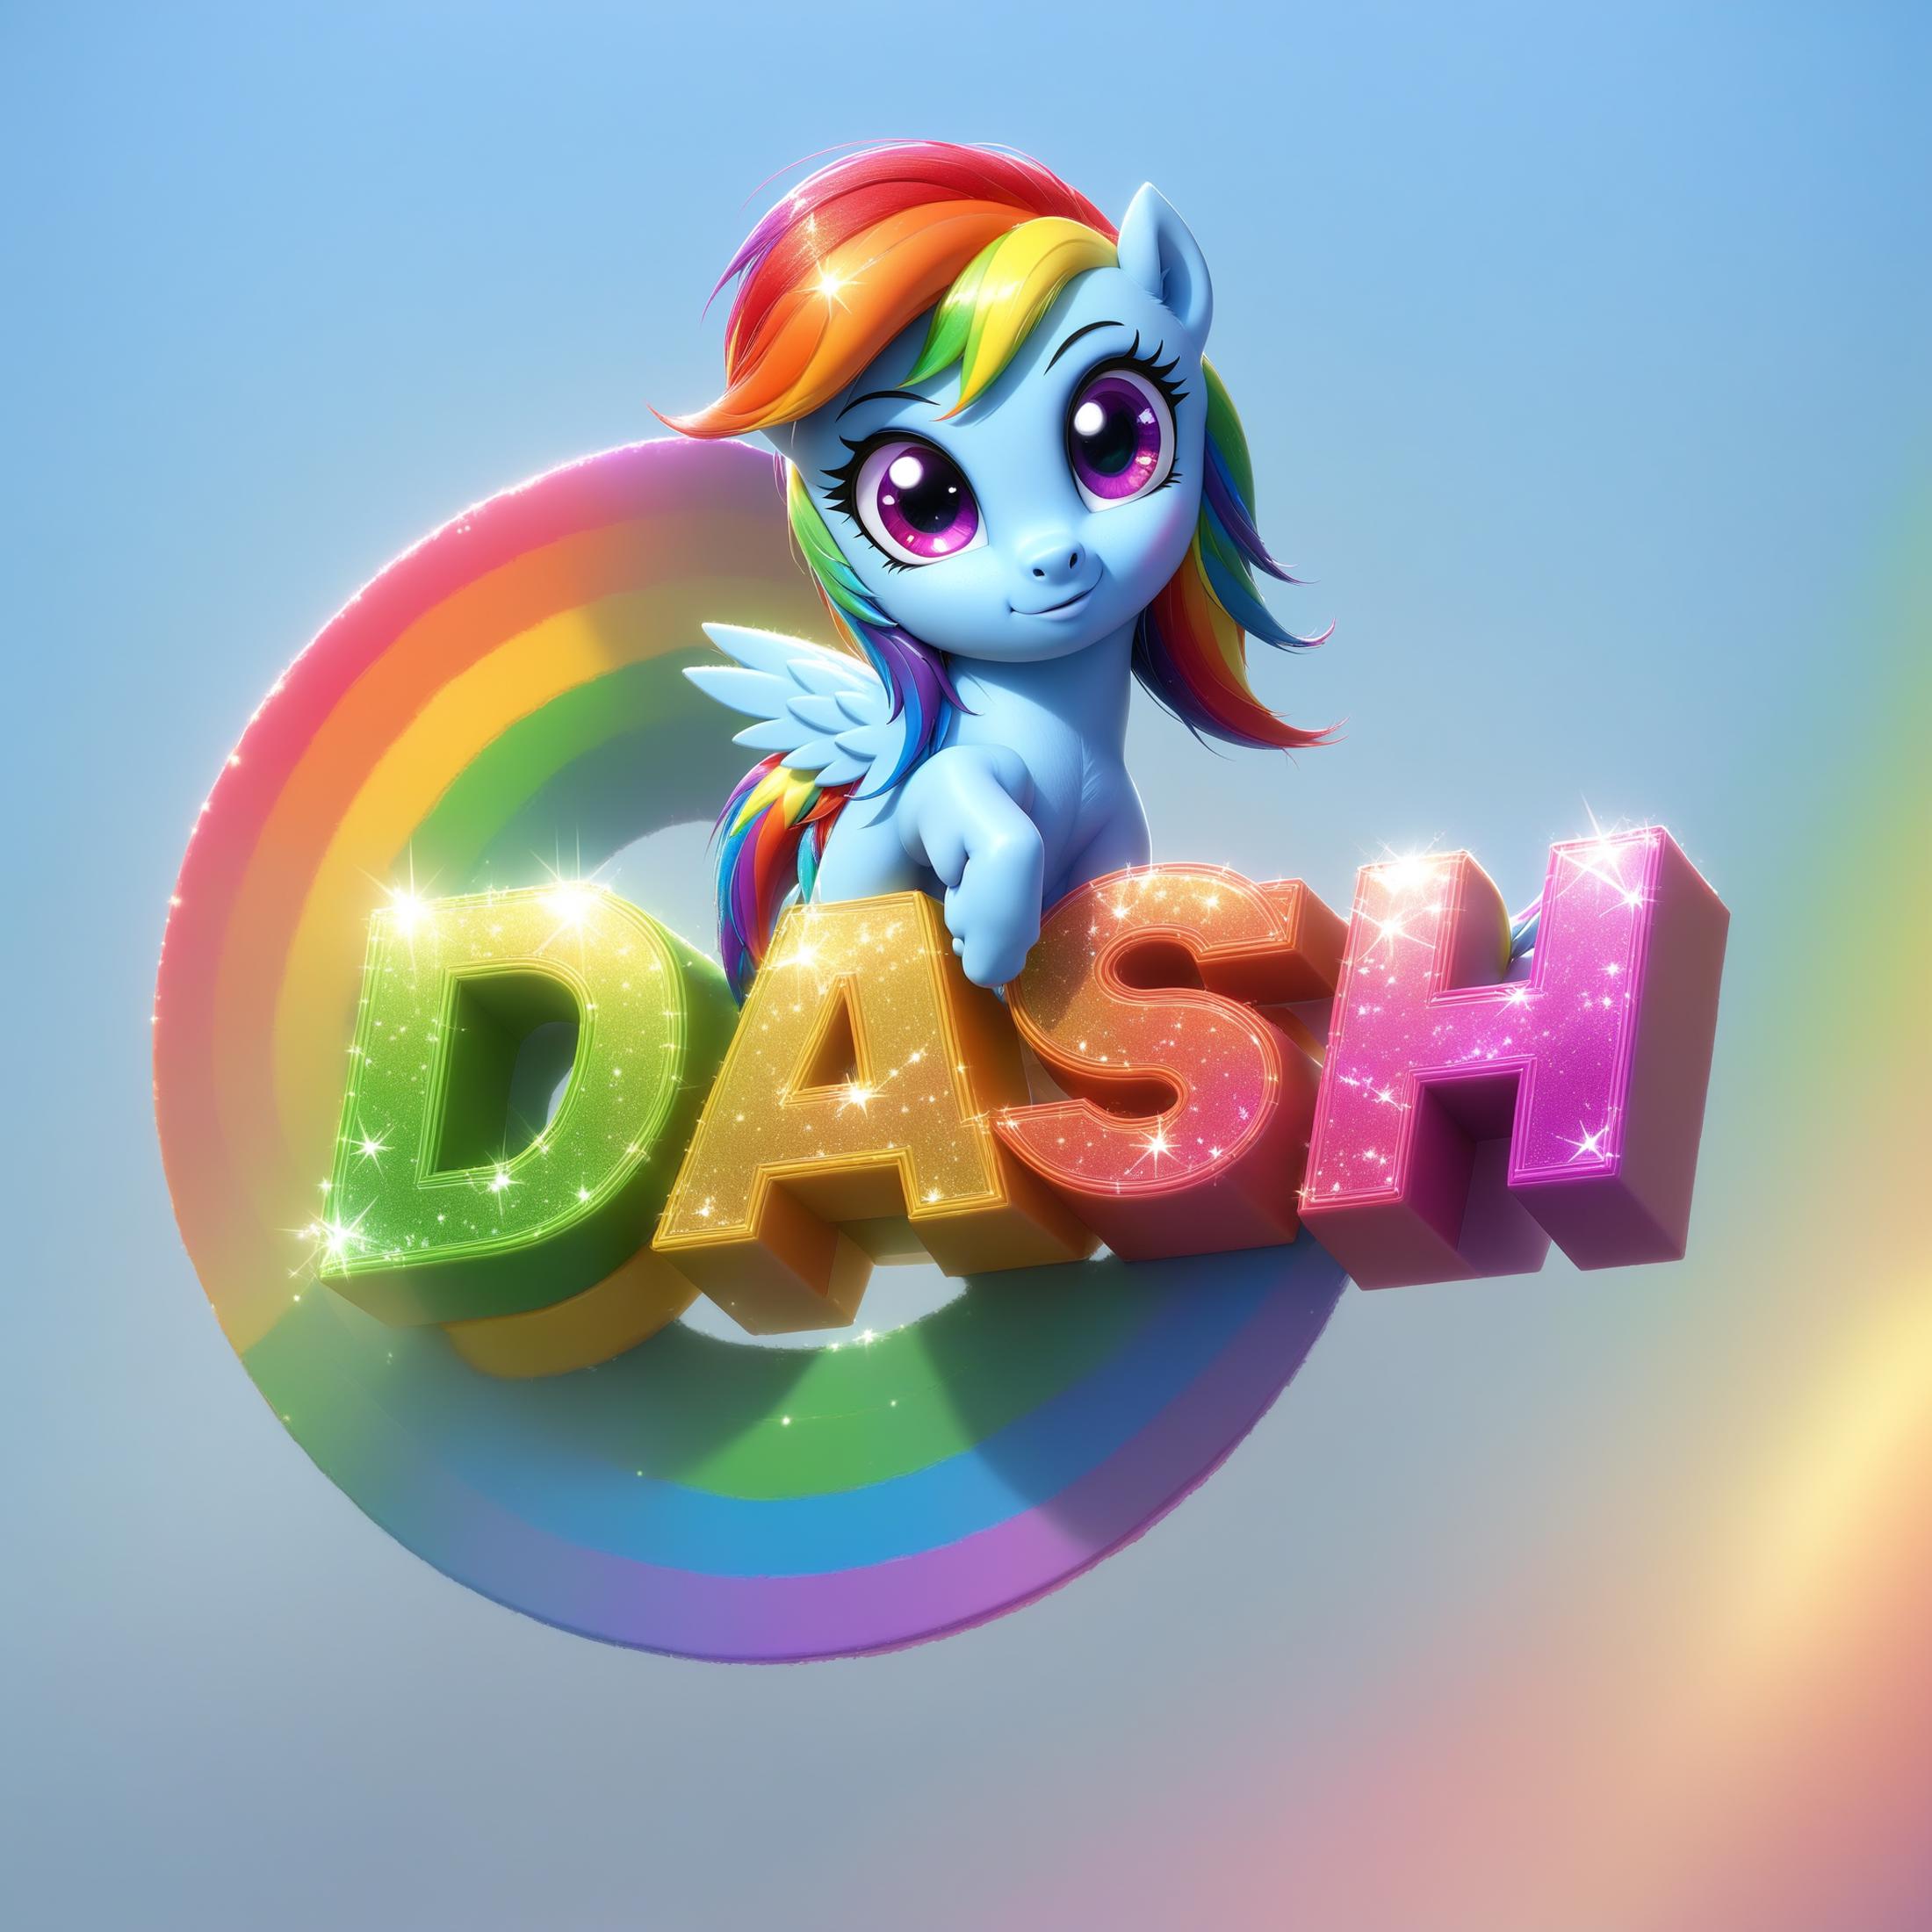 Colorful Rainbow Dash Logo on a White Background